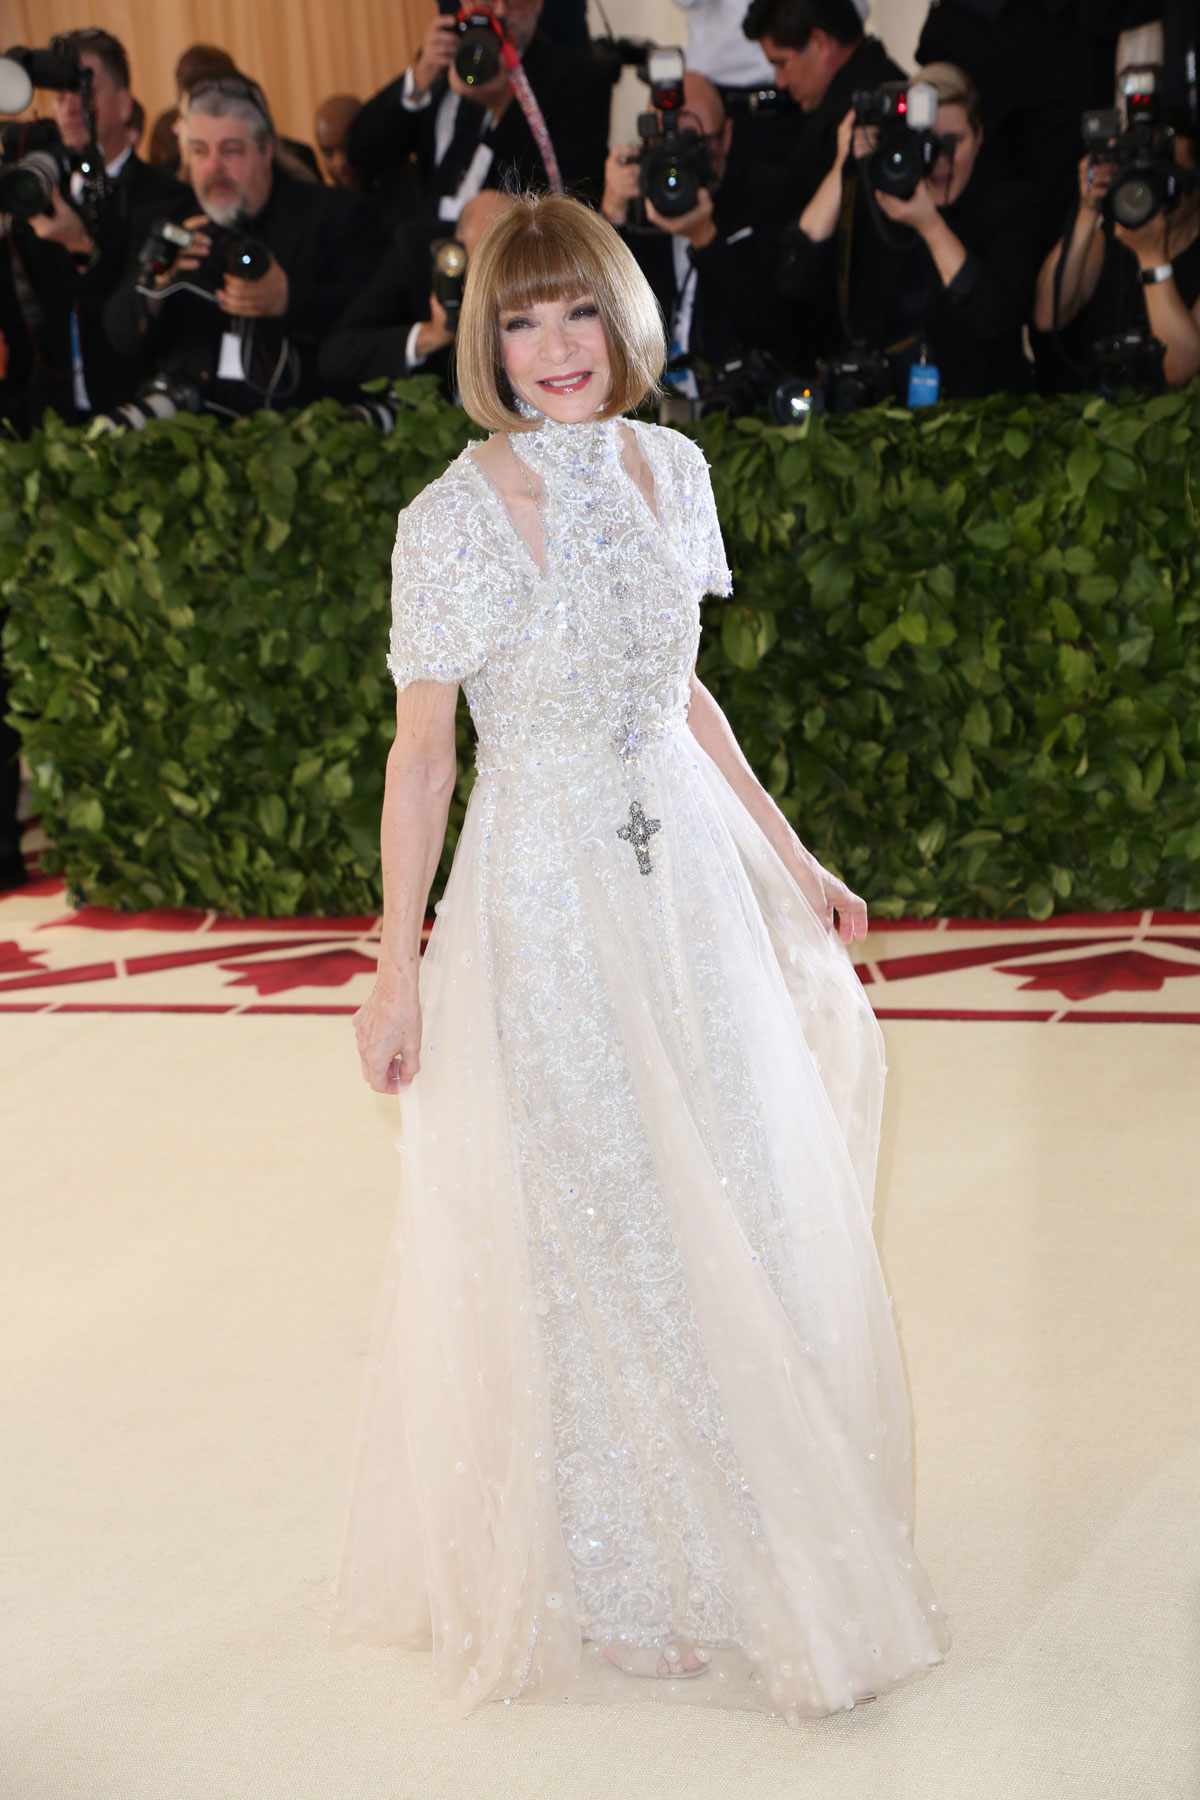 Anna Wintour wears a white beaded gown with a cross necklace.